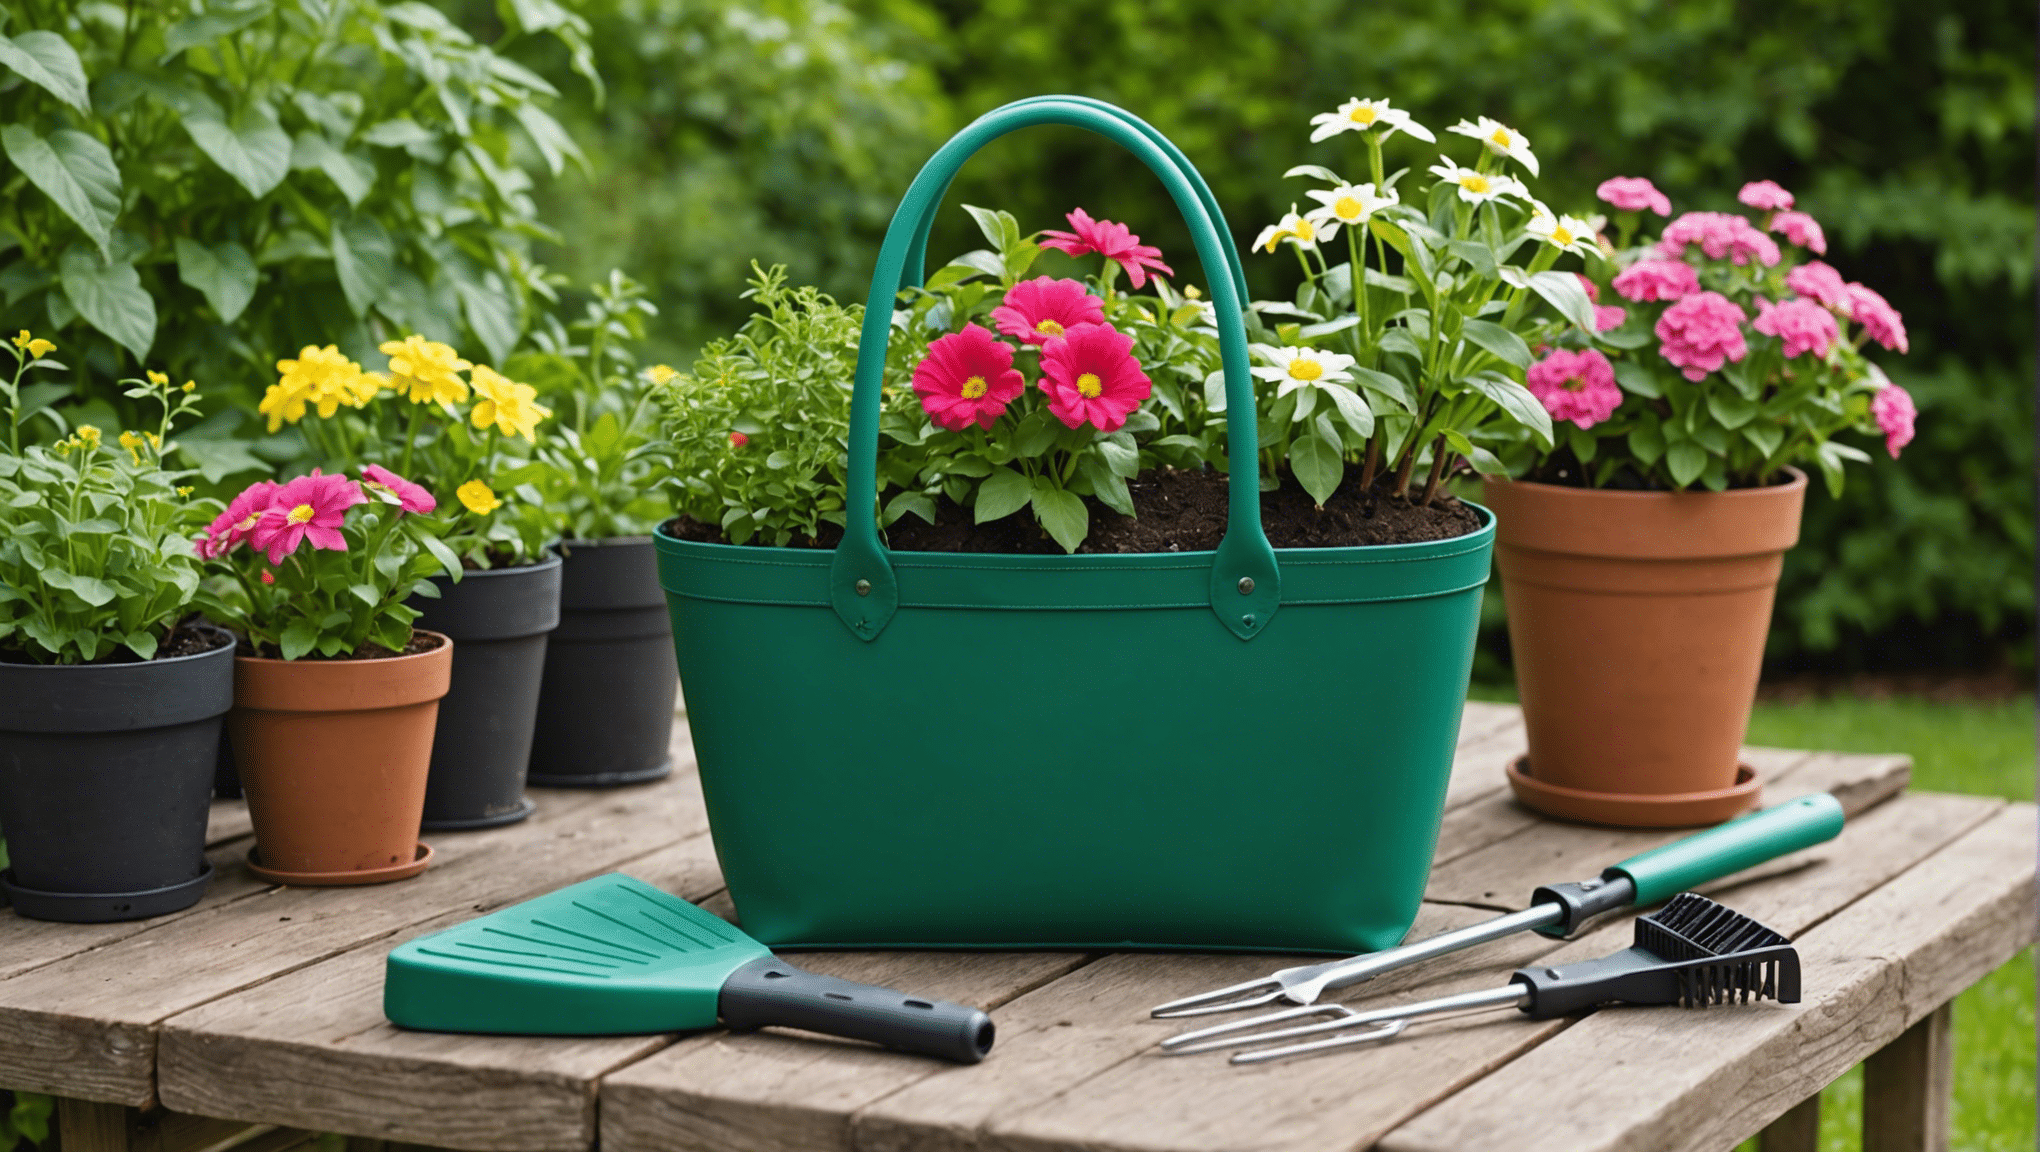 learn about the must-have features of a gardening tote and find the perfect one for your gardening needs. discover durable materials, ample storage, and convenient design for a delightful gardening experience.